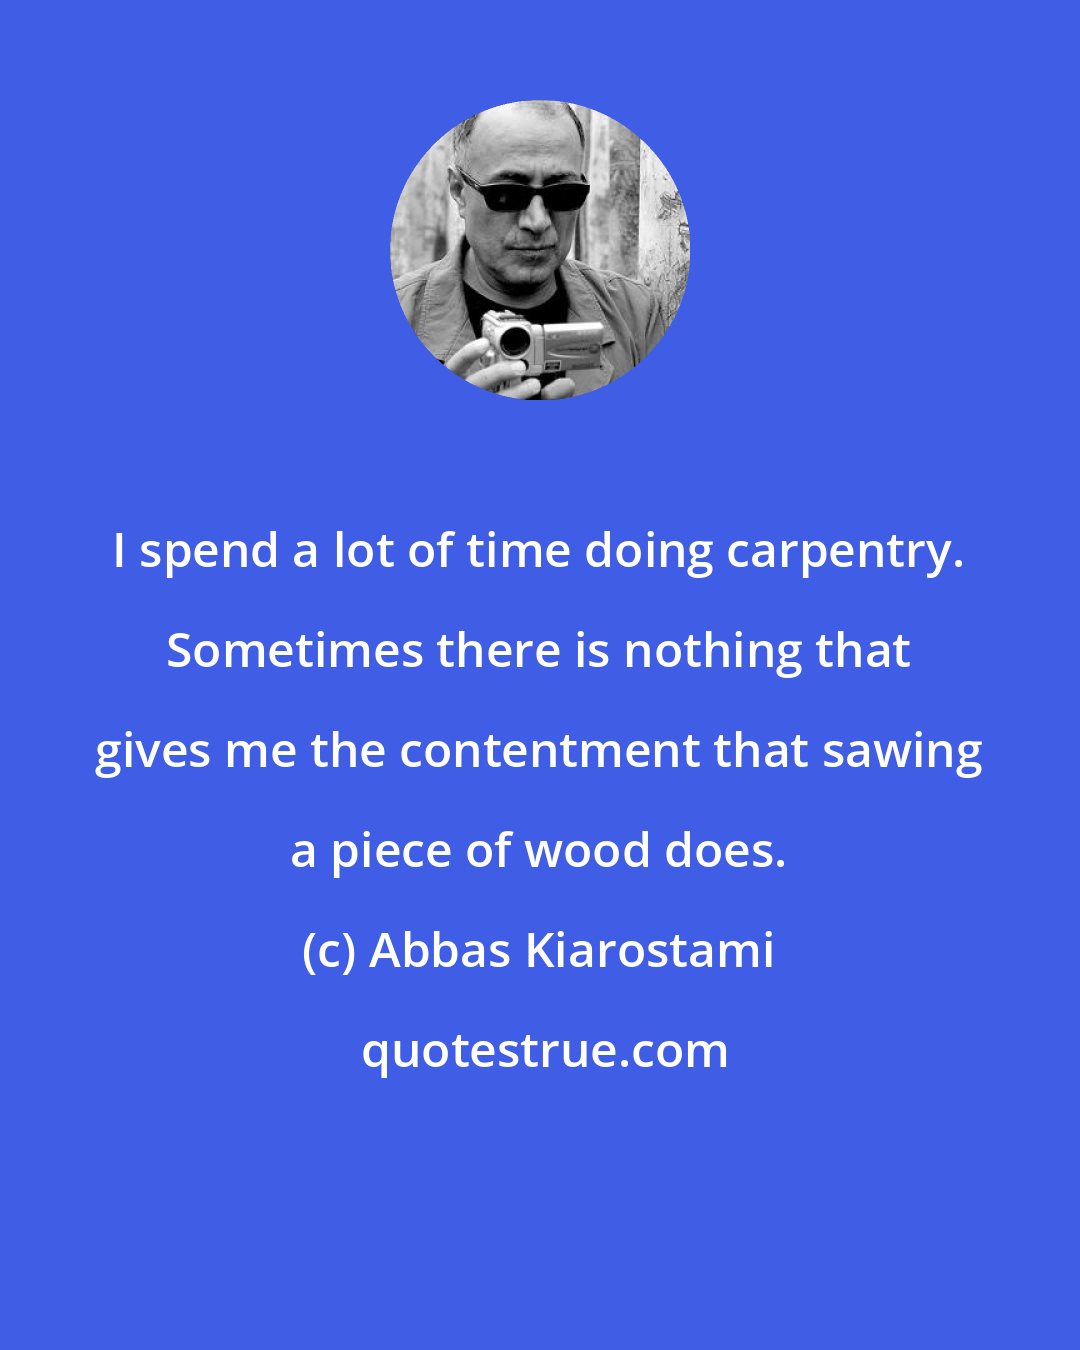 Abbas Kiarostami: I spend a lot of time doing carpentry. Sometimes there is nothing that gives me the contentment that sawing a piece of wood does.